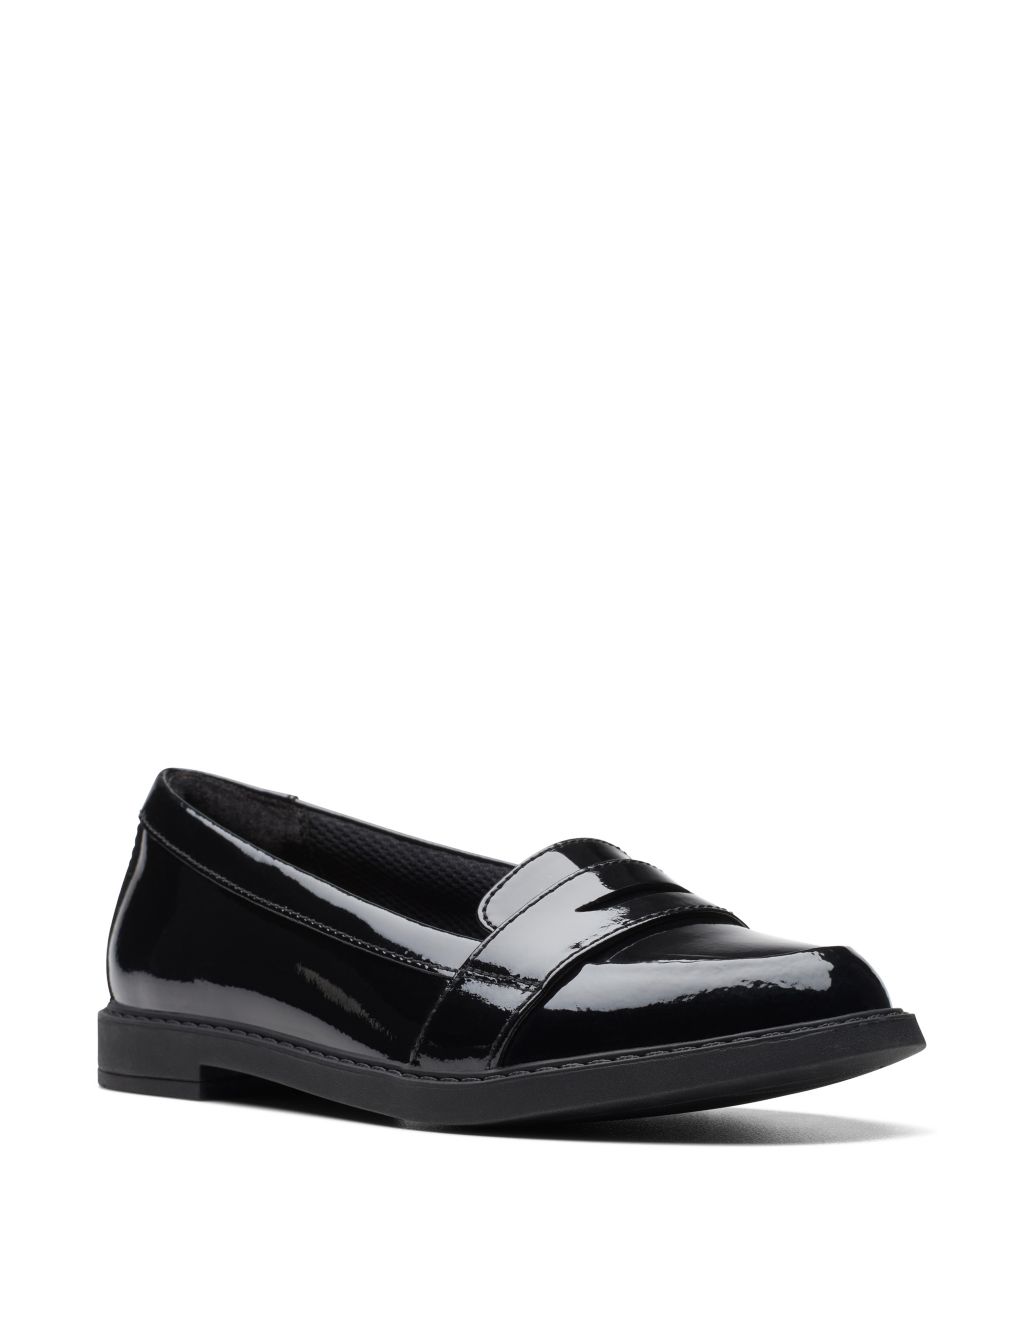 Kids' Patent Leather Slip-On Loafers (13 Small - 2½ Large) image 2